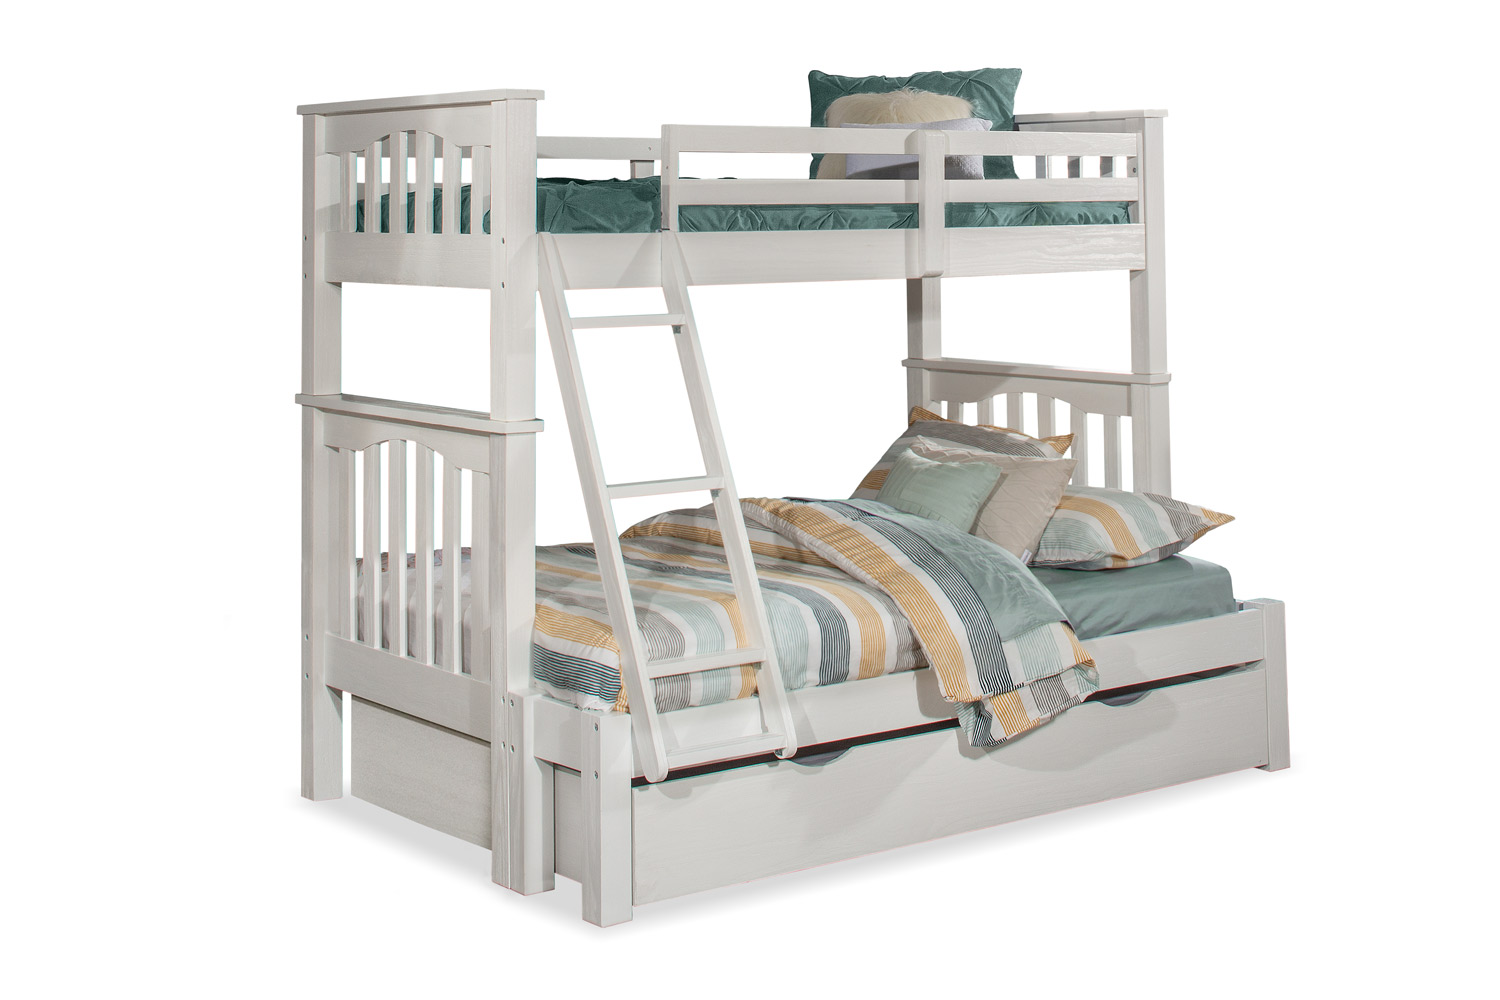 NE Kids Highlands Harper Twin/Full Bunk Bed with Trundle - White Finish